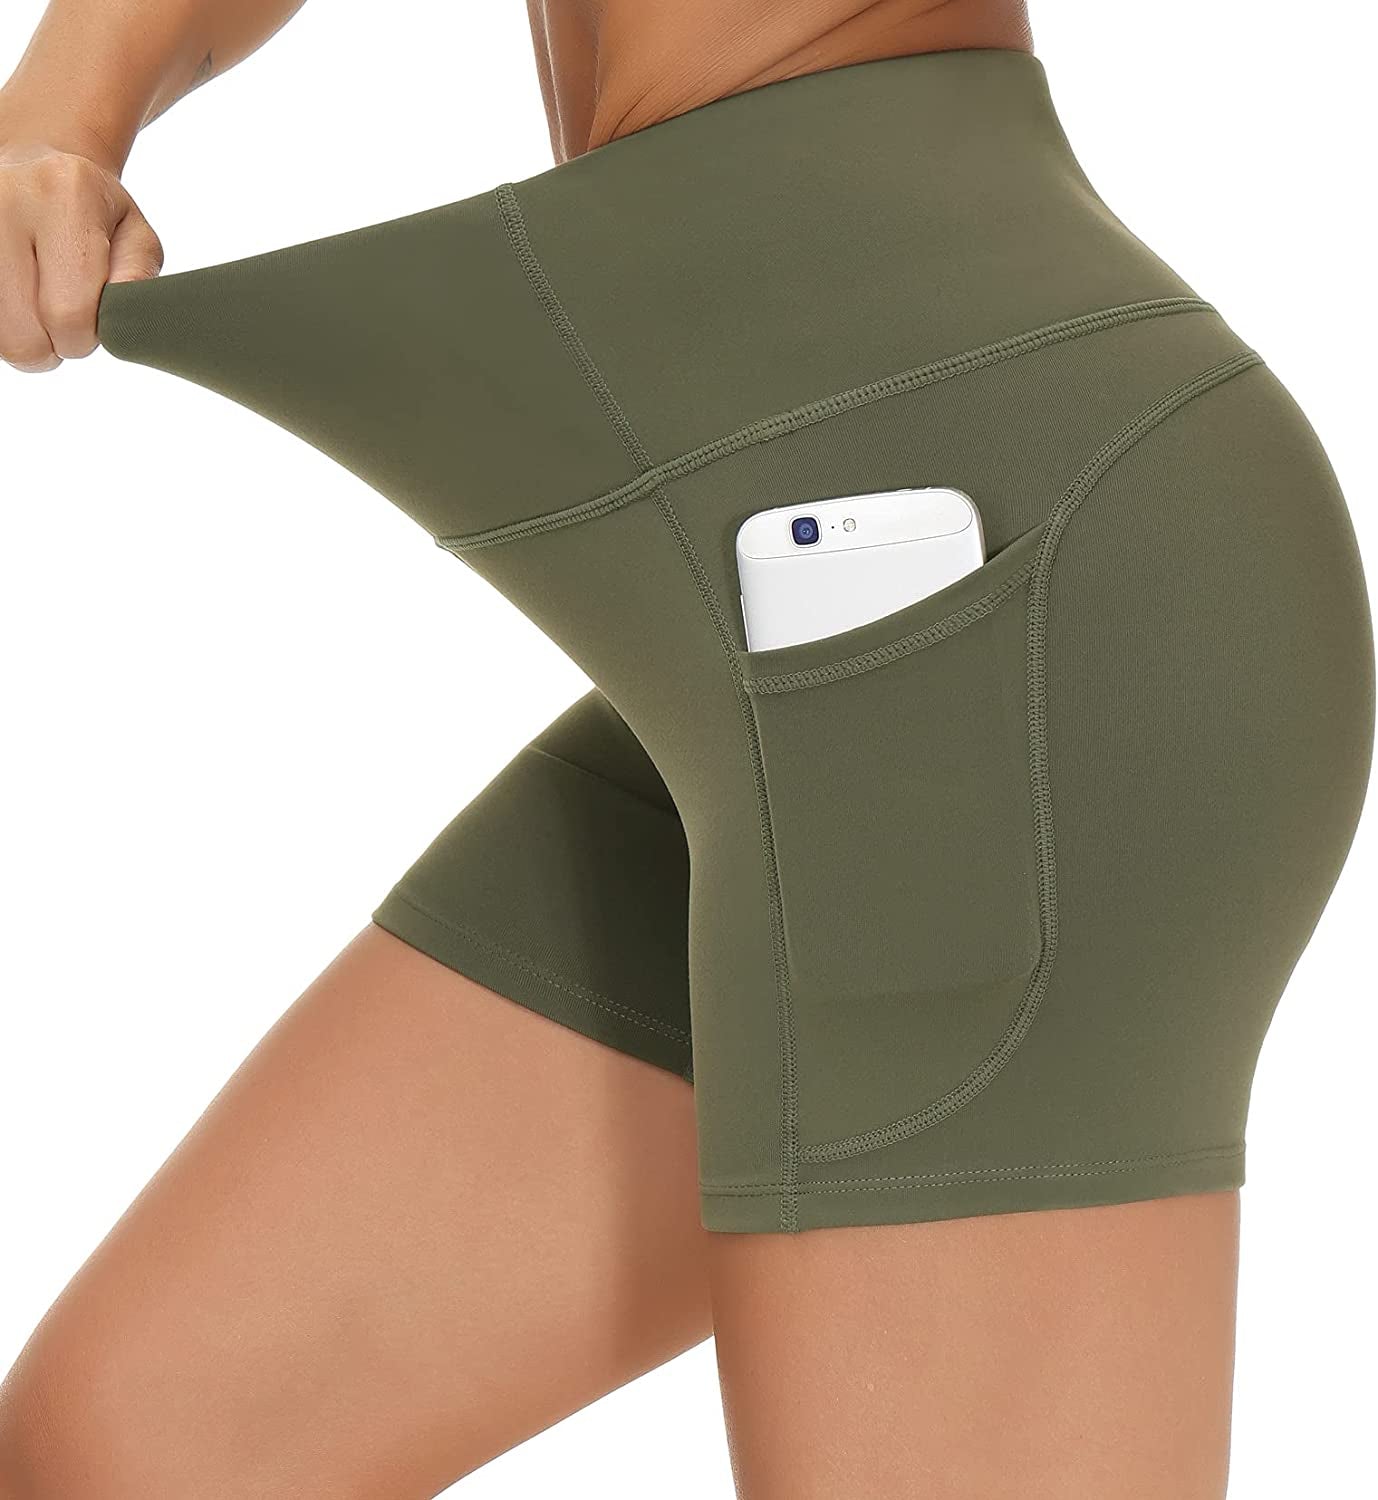 High Waist Yoga Shorts for Women'S Tummy Control Fitness Athletic Workout Running Shorts with Deep Pockets